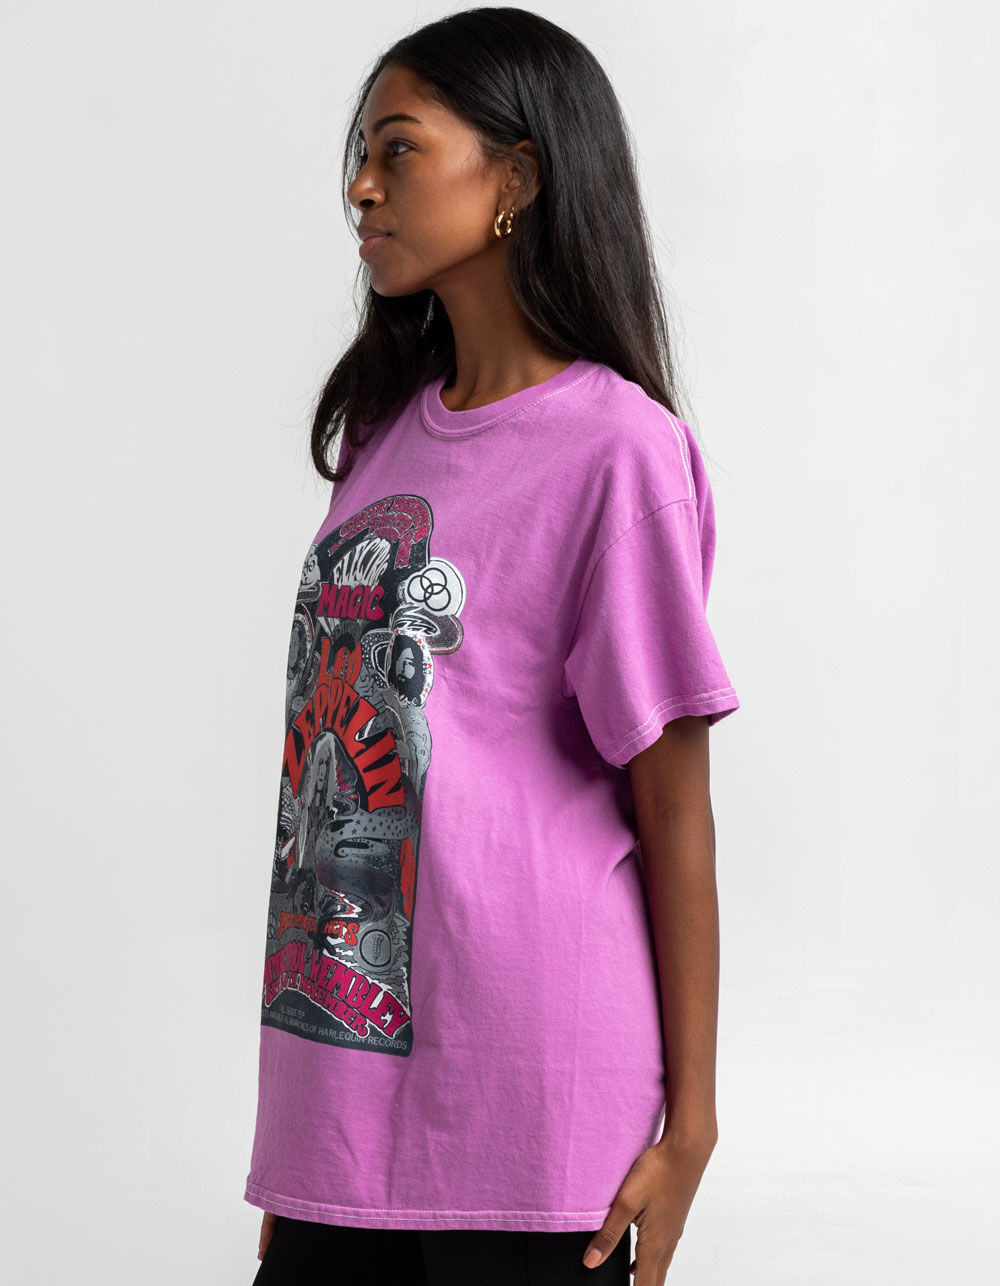 LIFE CLOTHING CO. x Led Zeppelin Womens Oversize Tee - PURPLE | Tillys